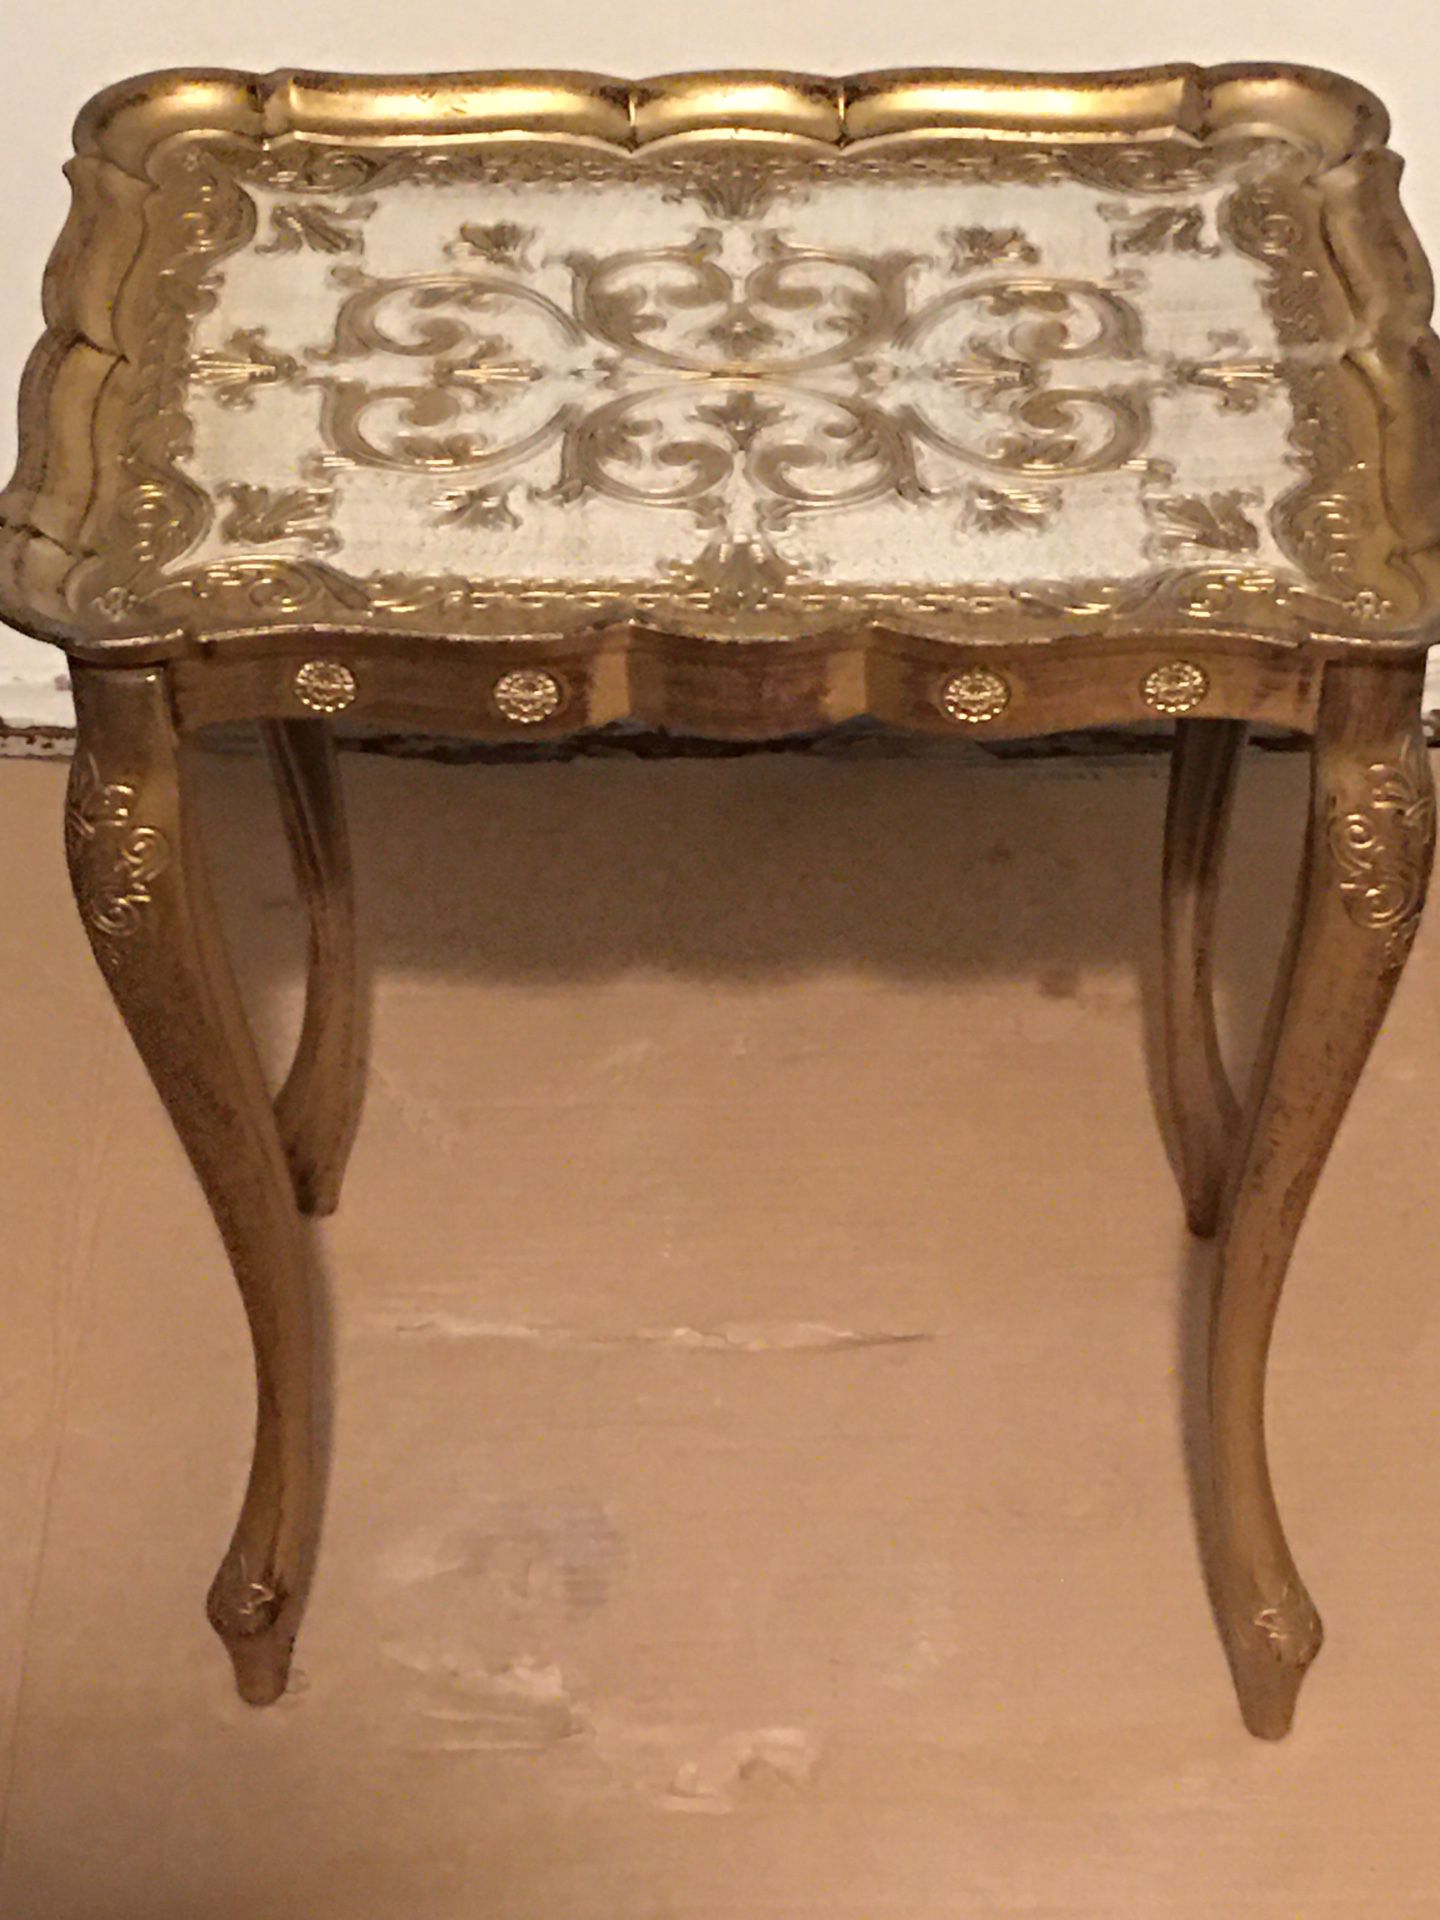 1950s Hollywood Regency Gold Gild Resin Nesting Table Made in Florence Italy - -